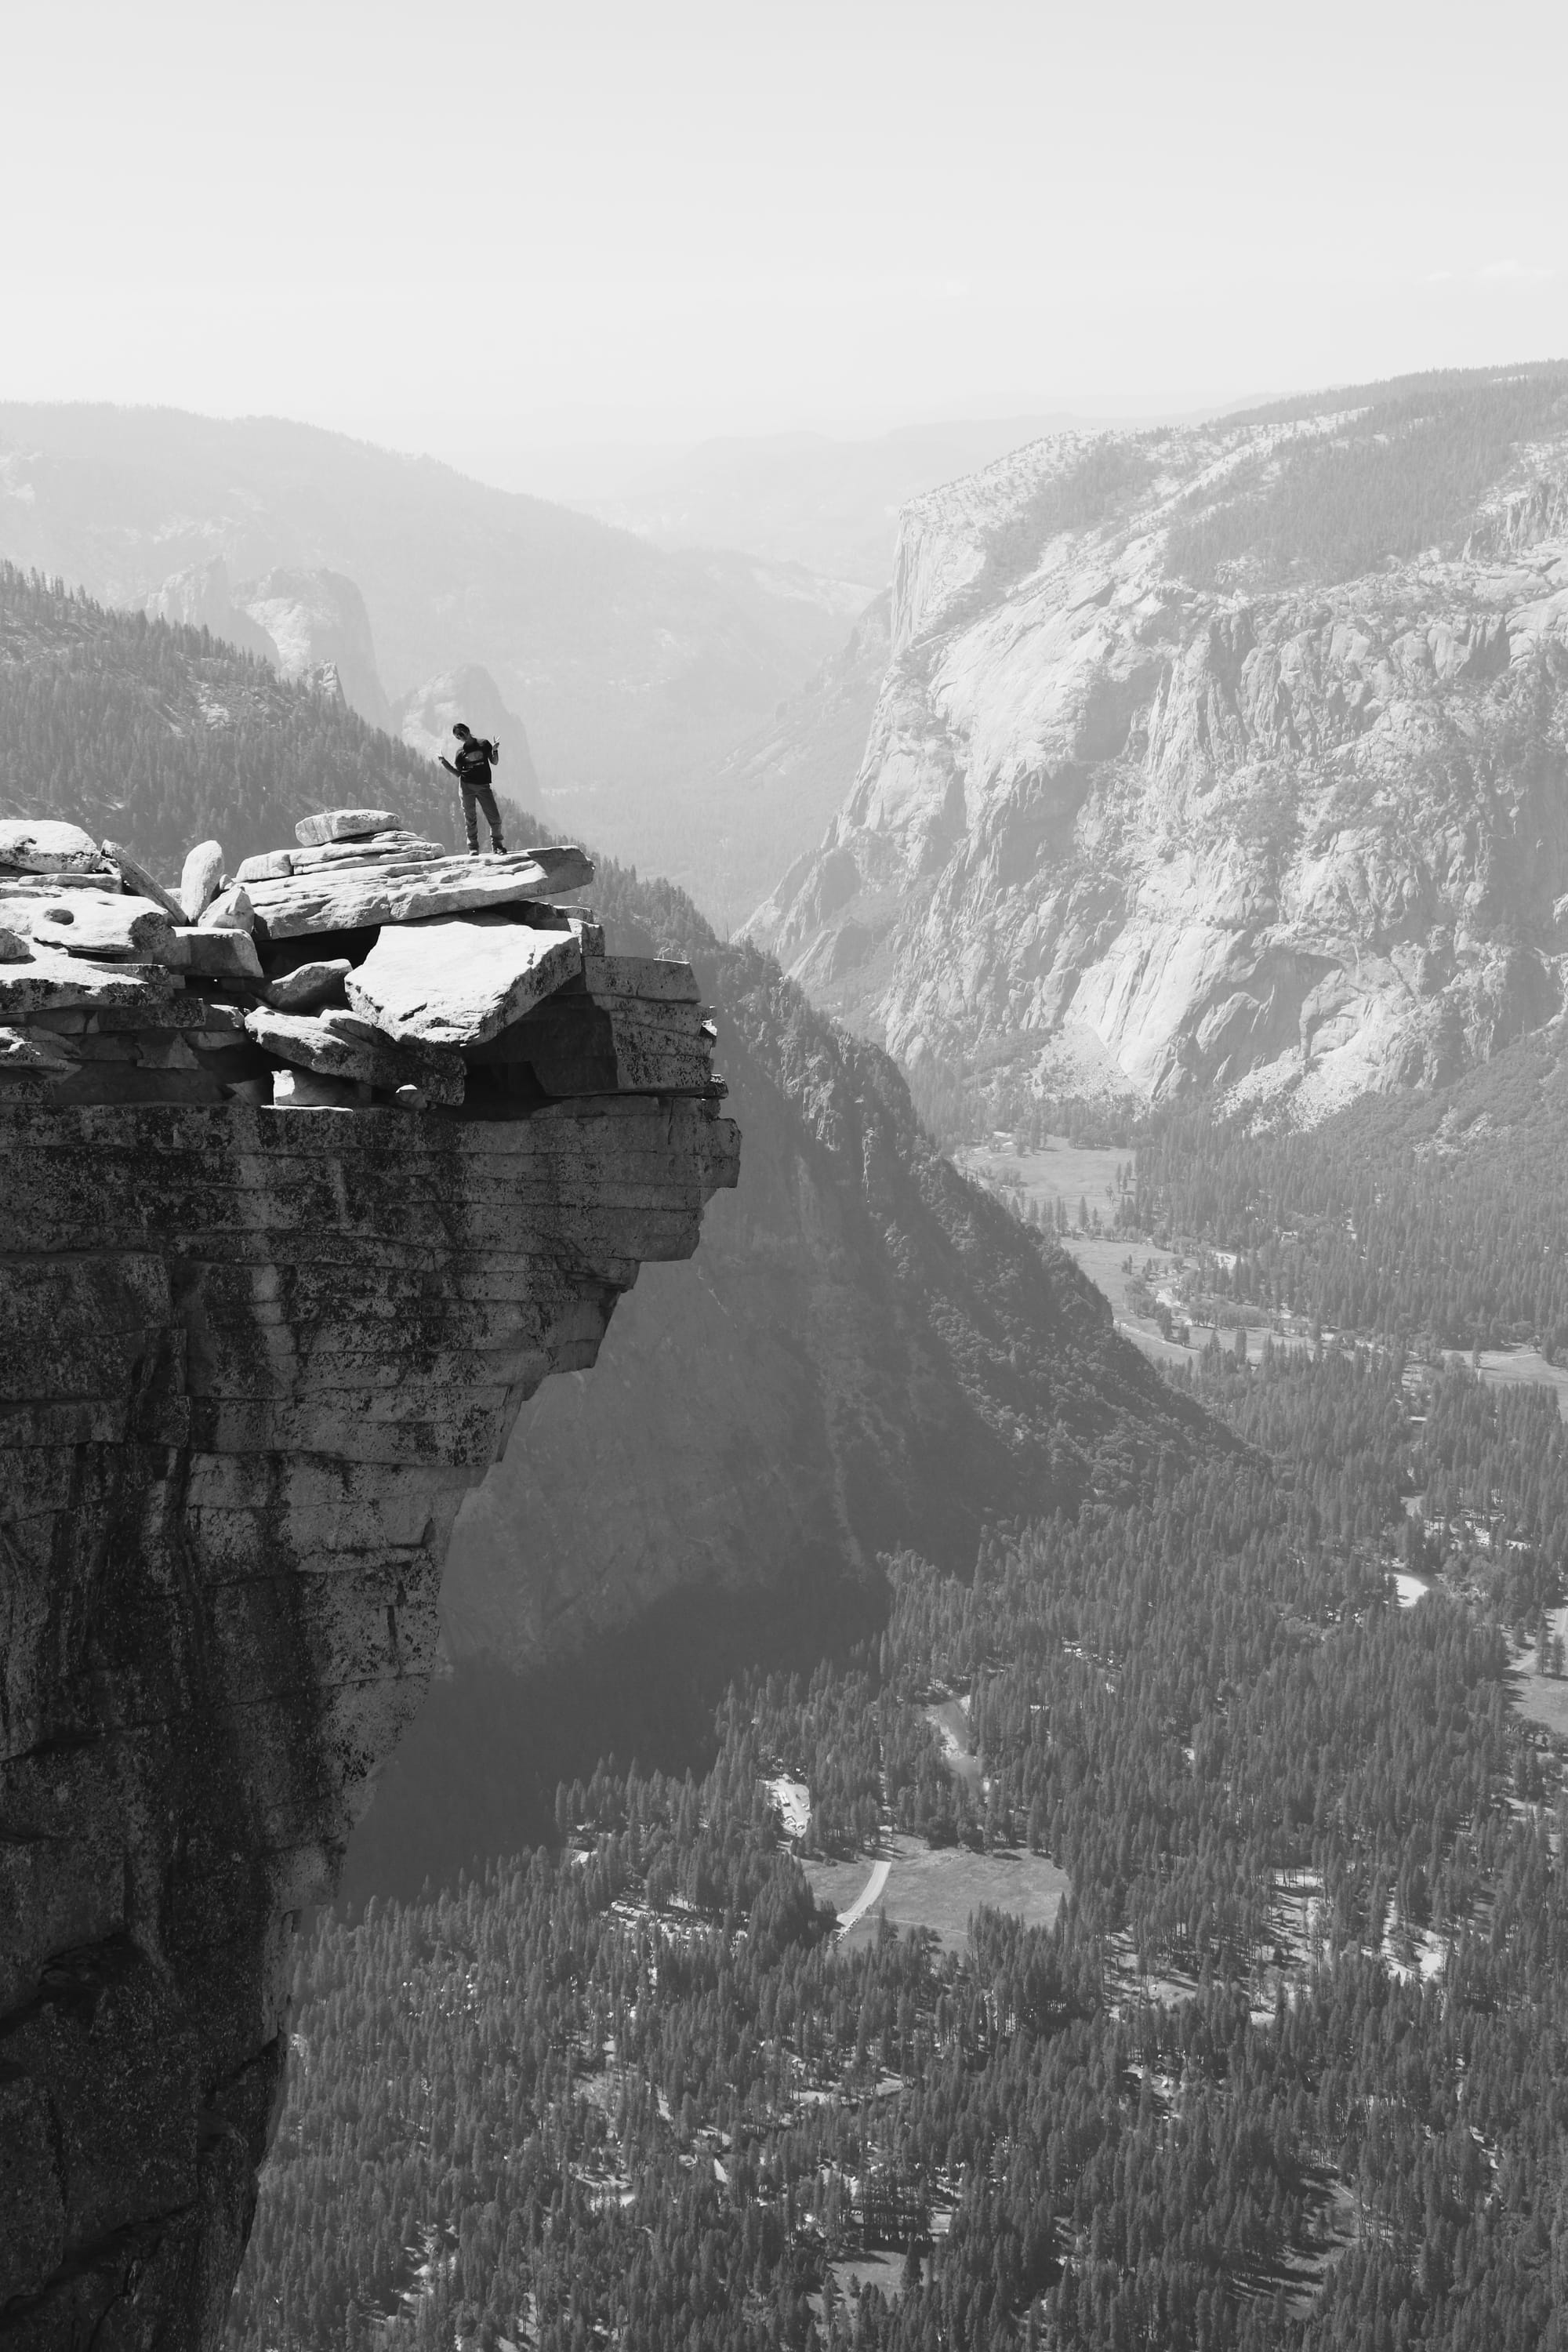 Me on top of Half Dome